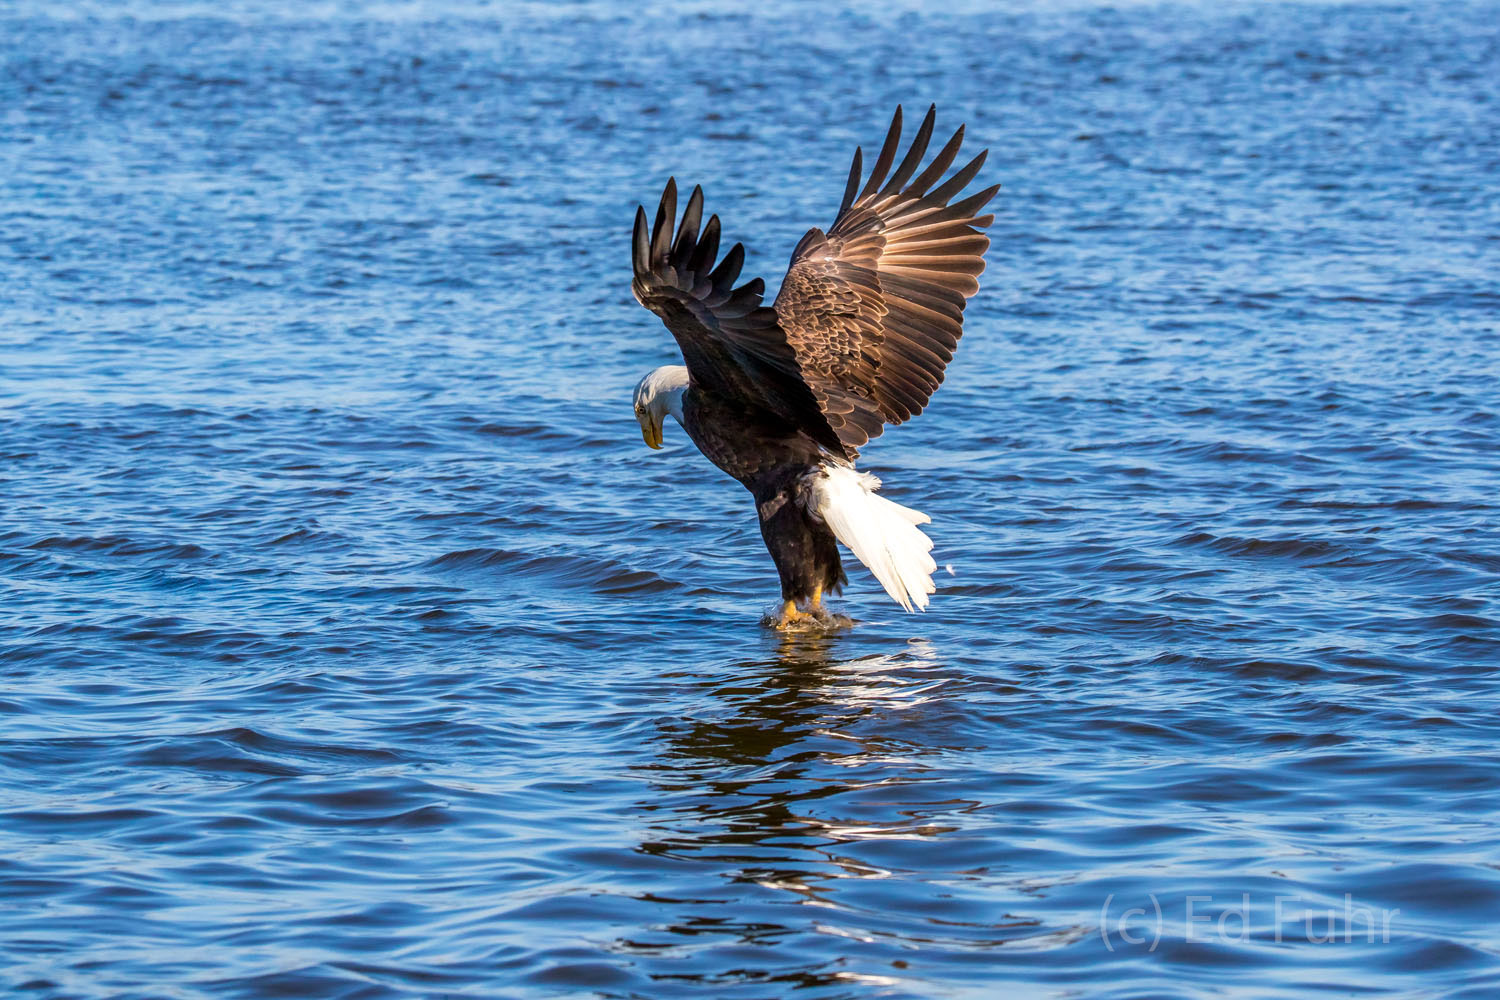 A bald eagle strikes for breakfast.